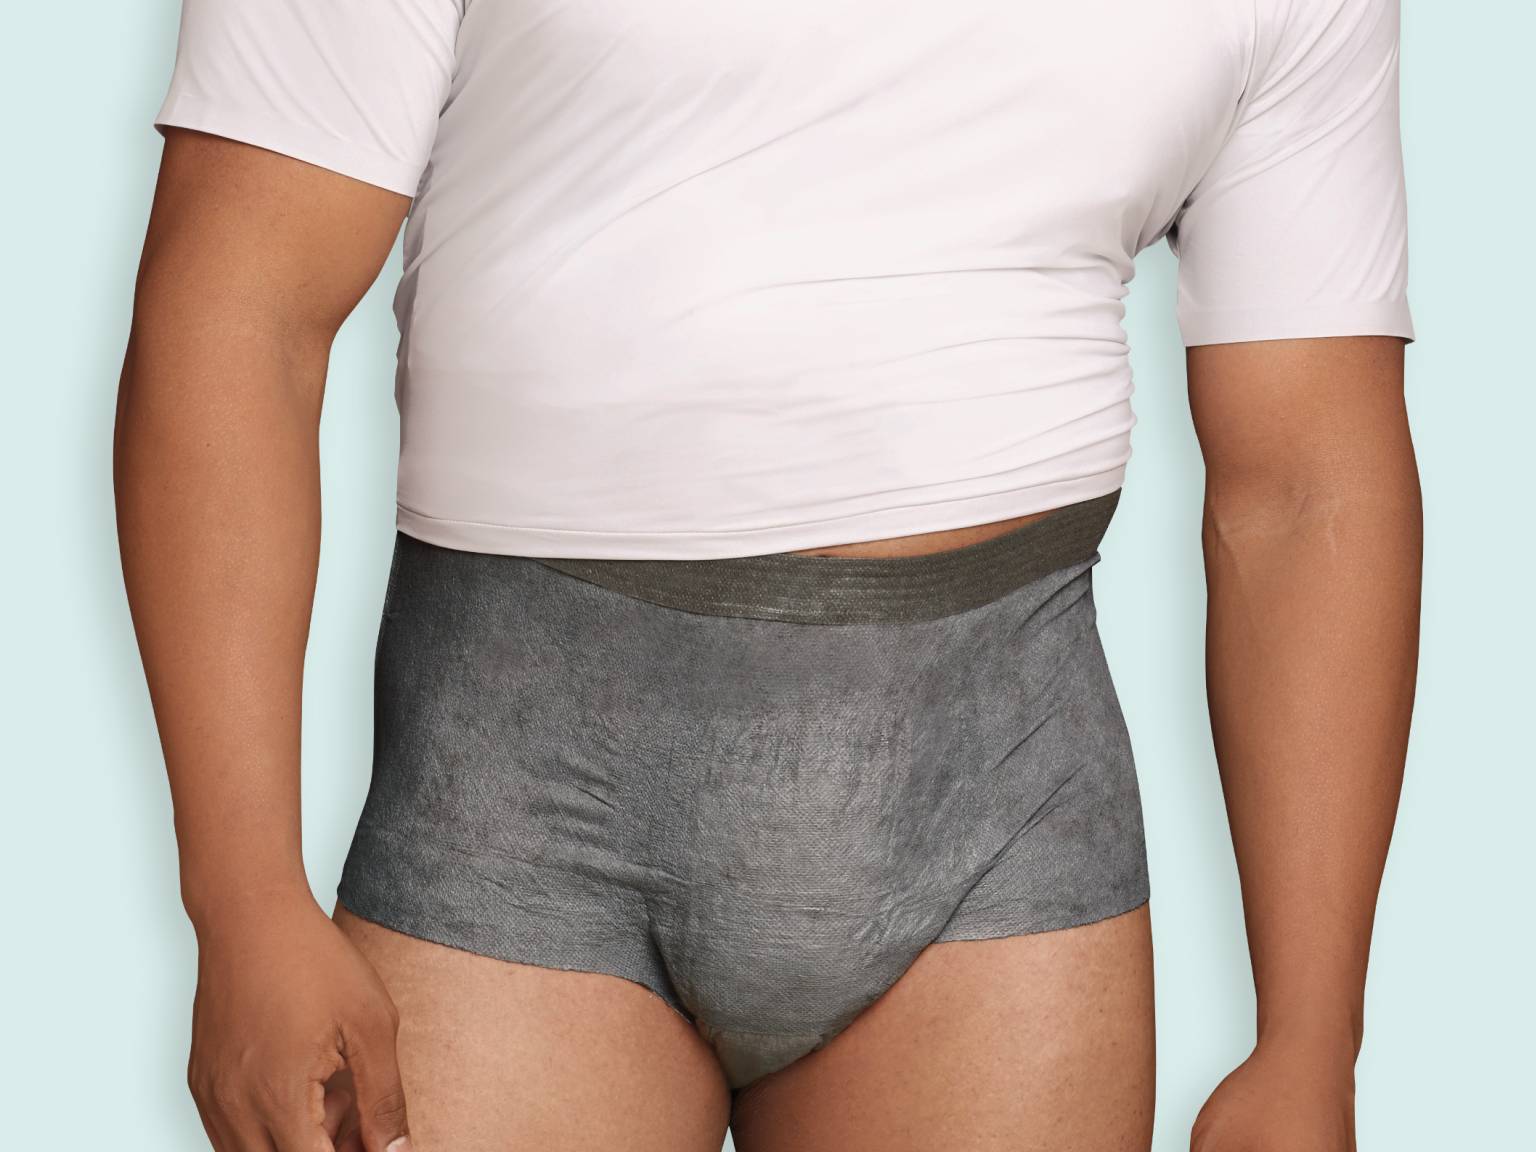 Some men admit to keeping their old underwear for more than 20